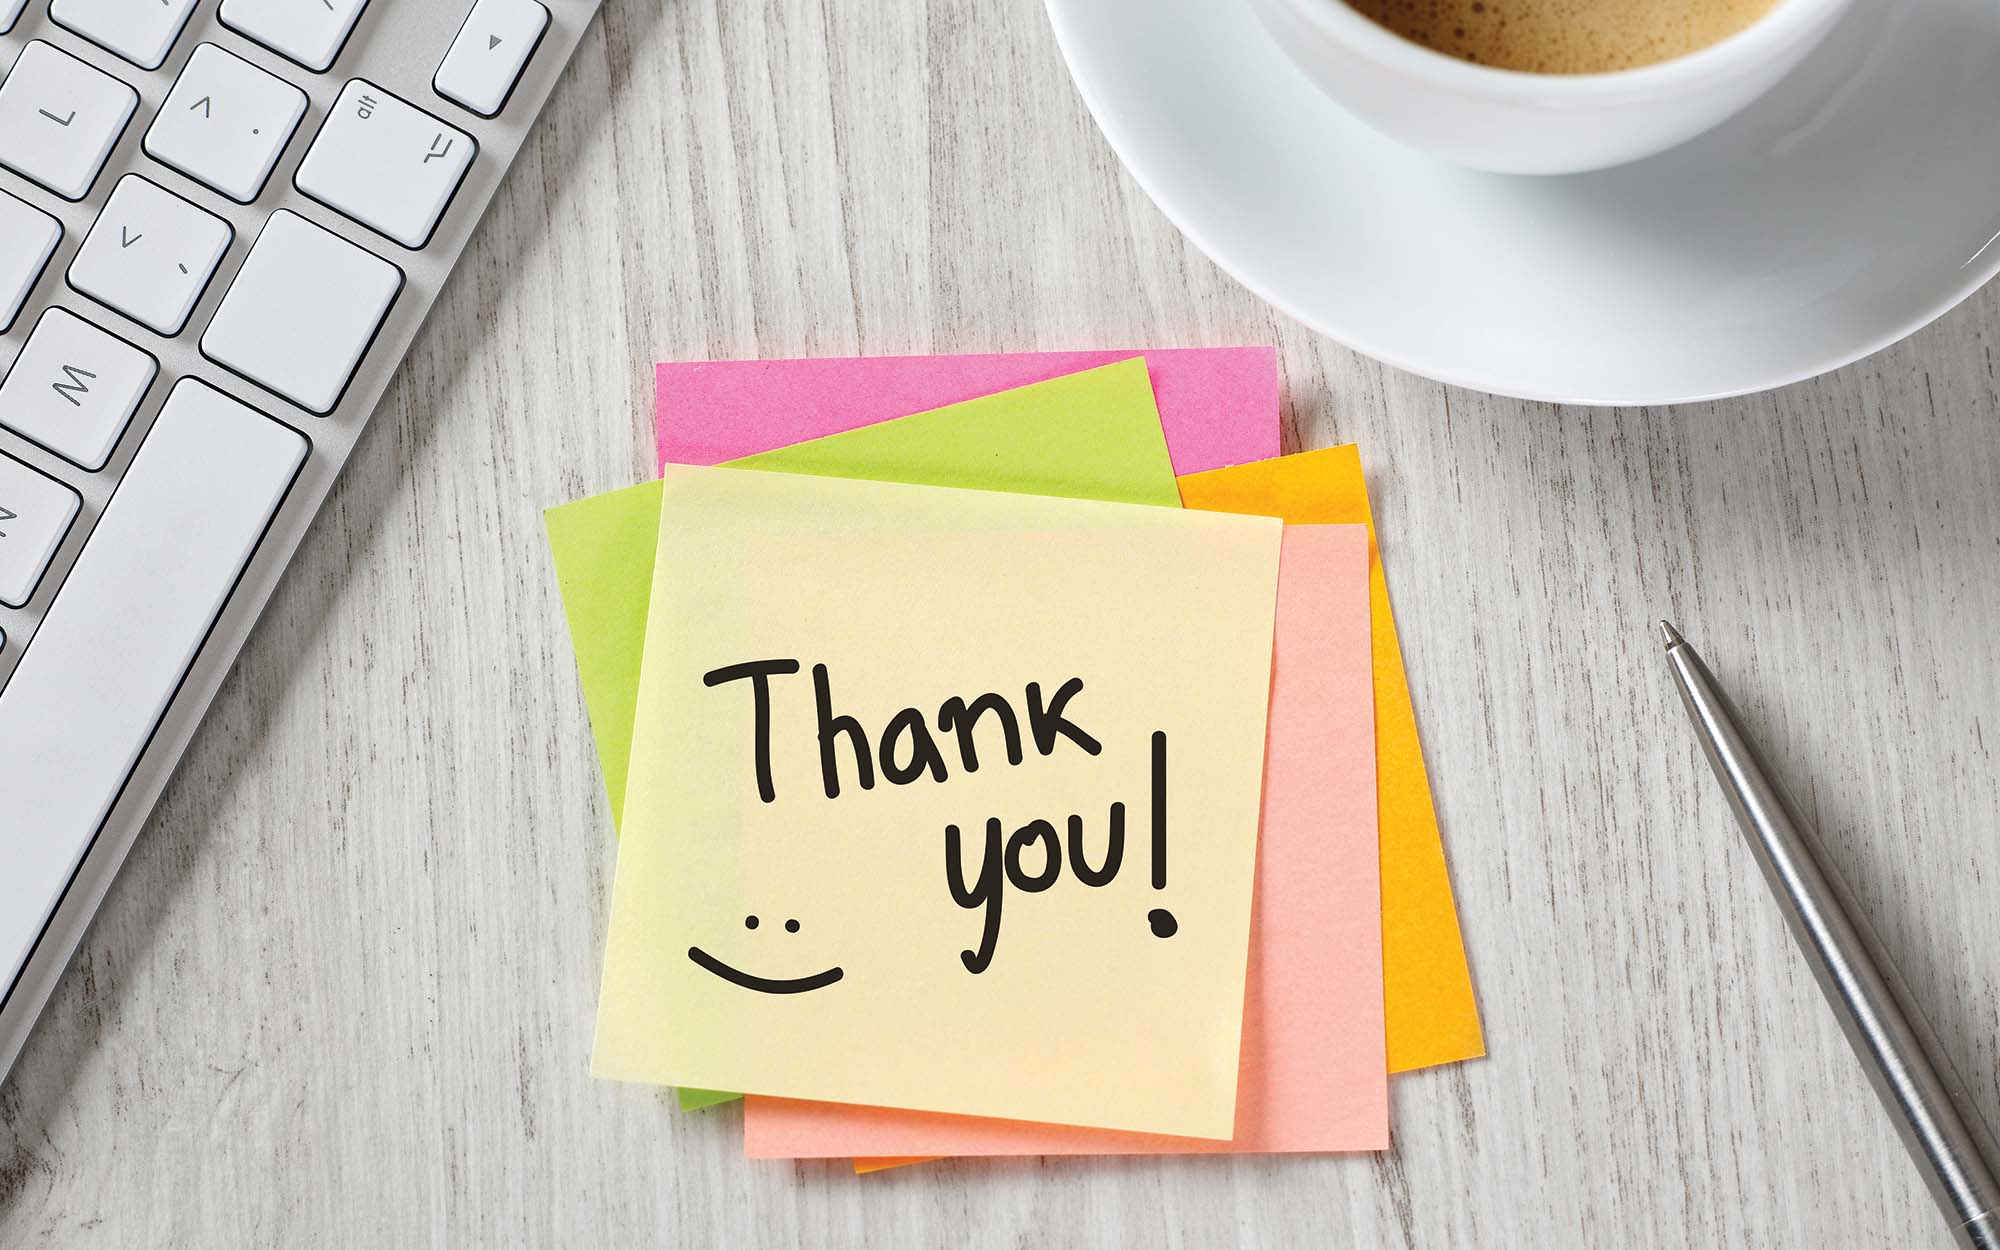 Thank you Post-it Note